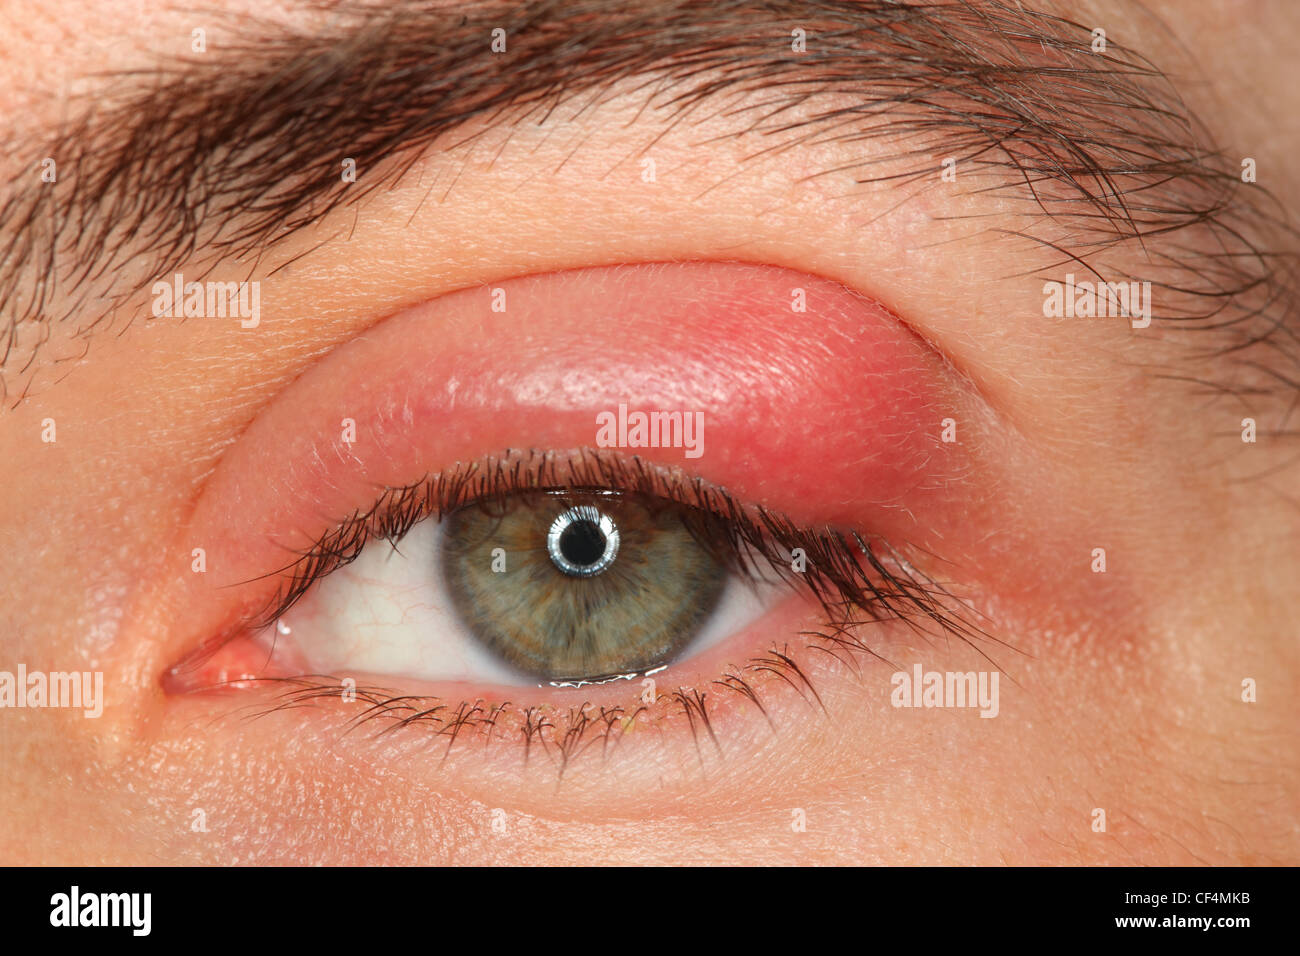 illness person eye with sty and pus looking into the camera Stock Photo